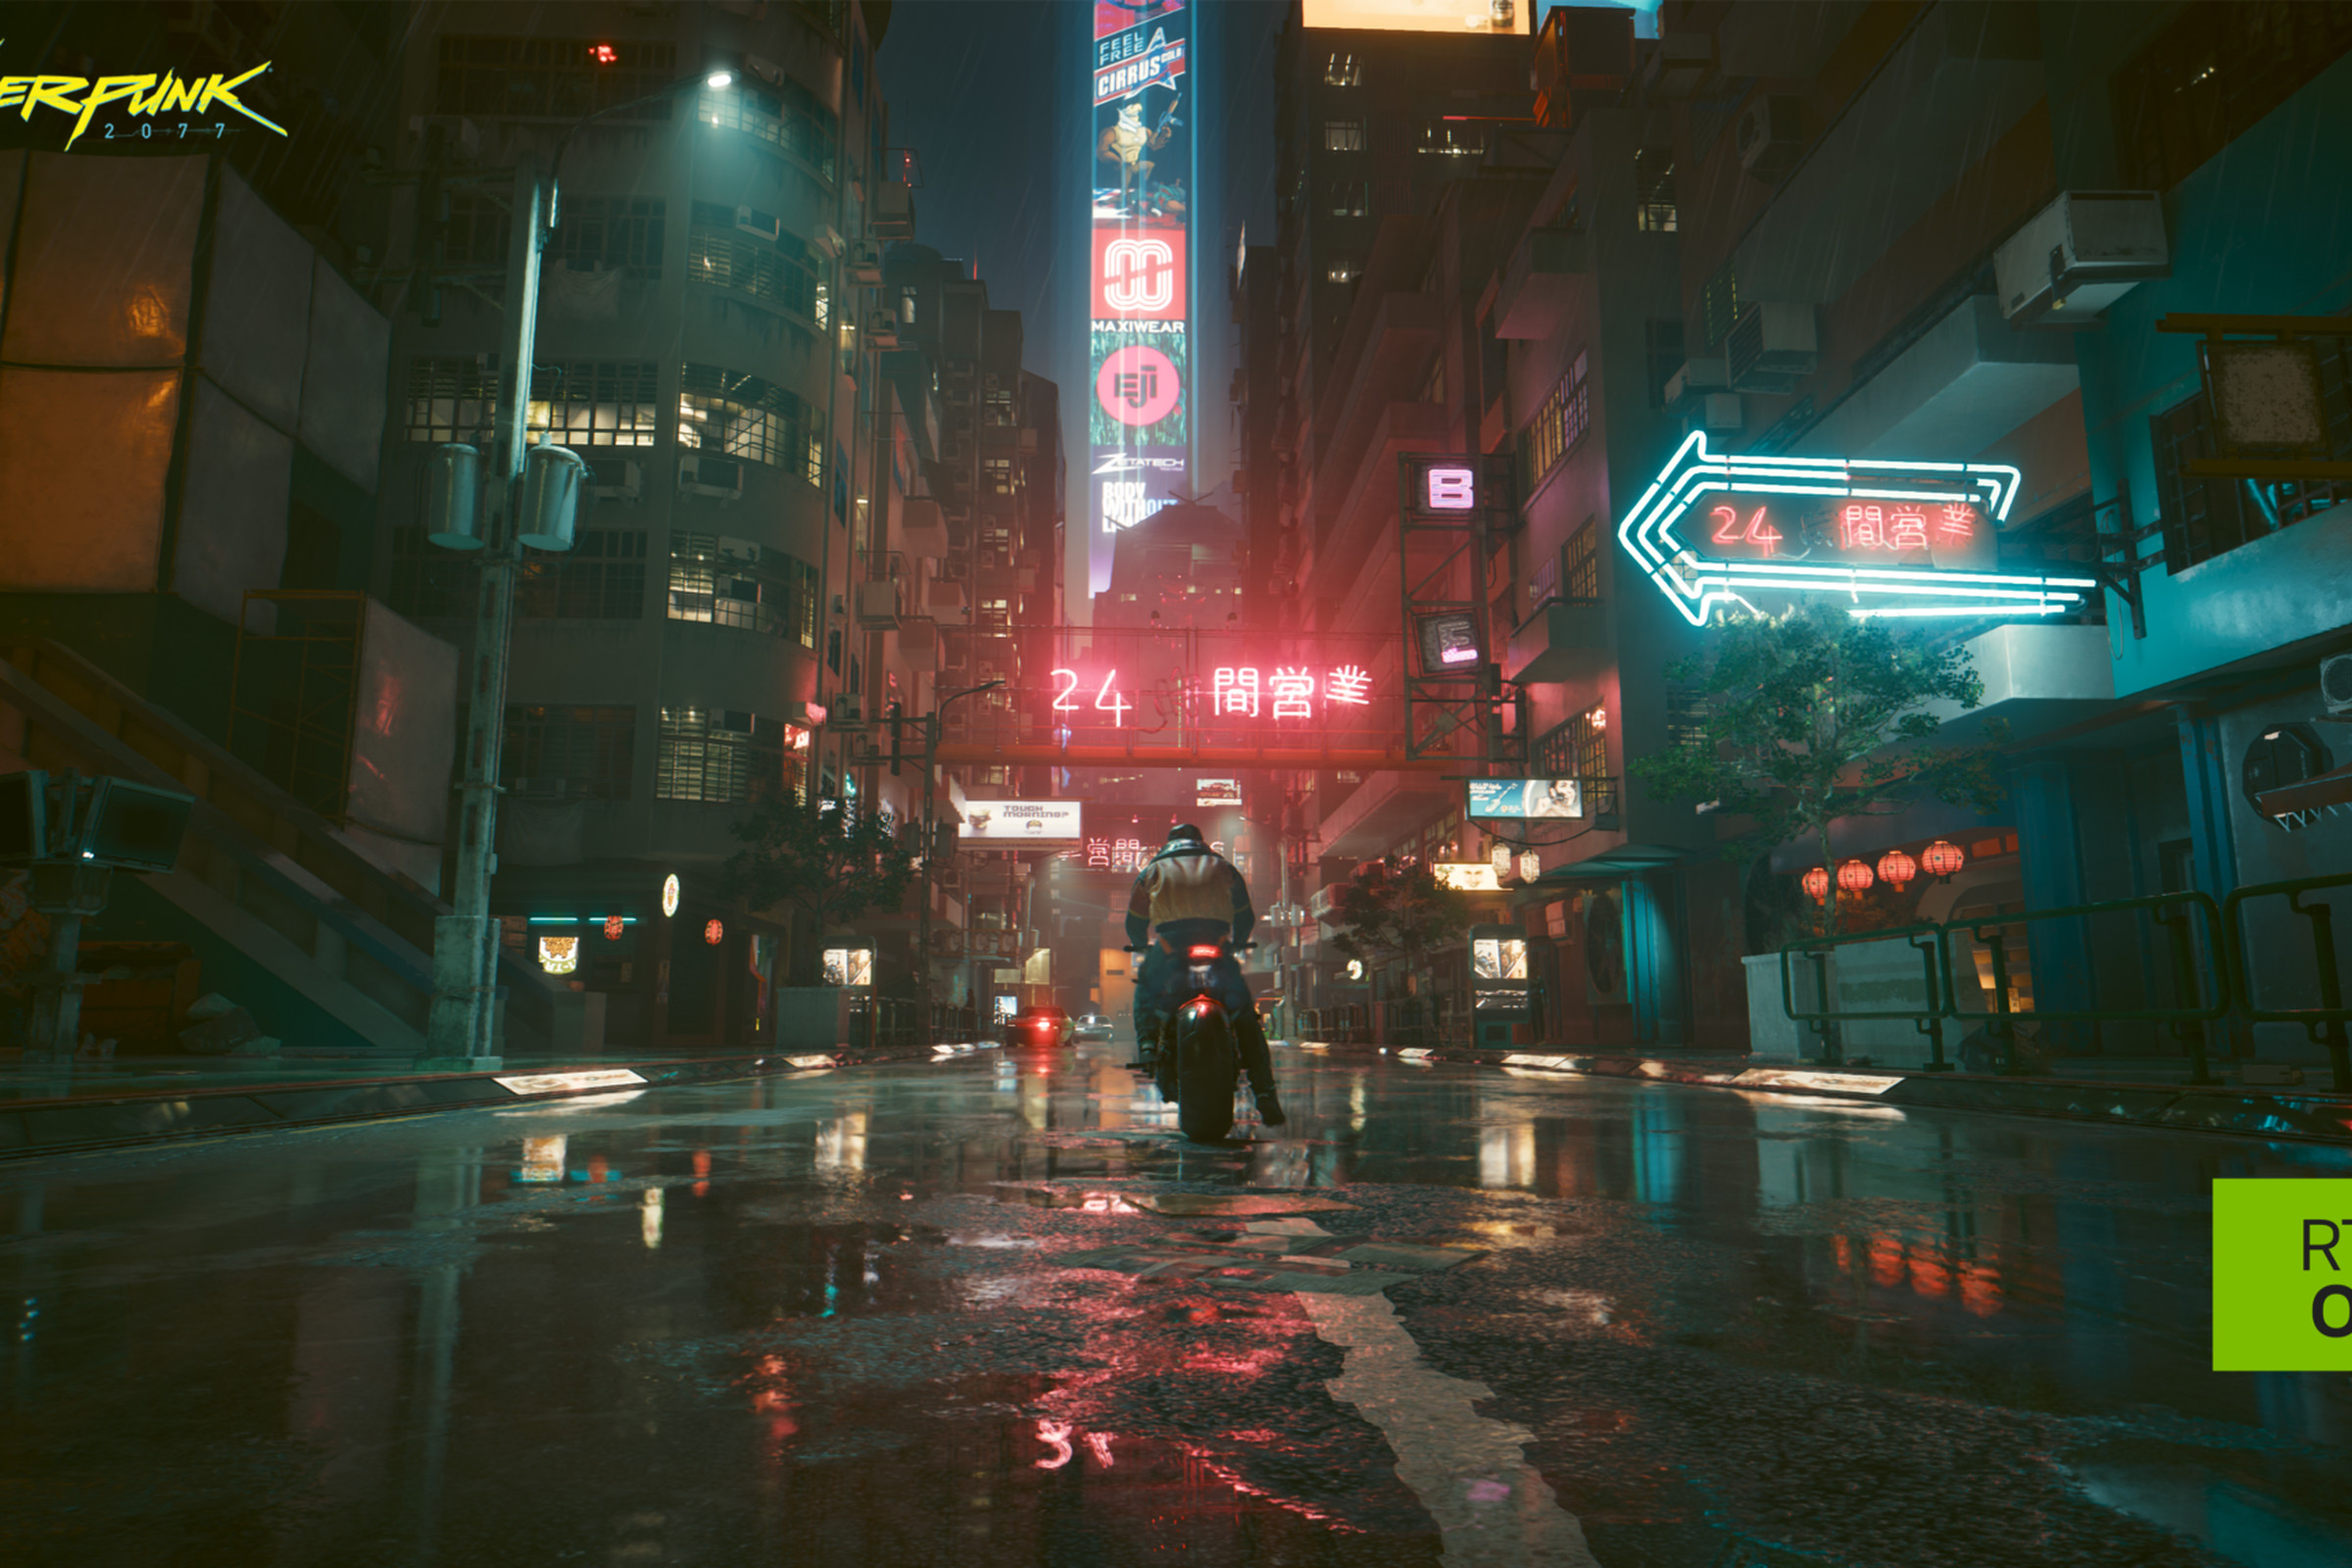 A scene in Cyberpunk 2077 with ray tracing enabled